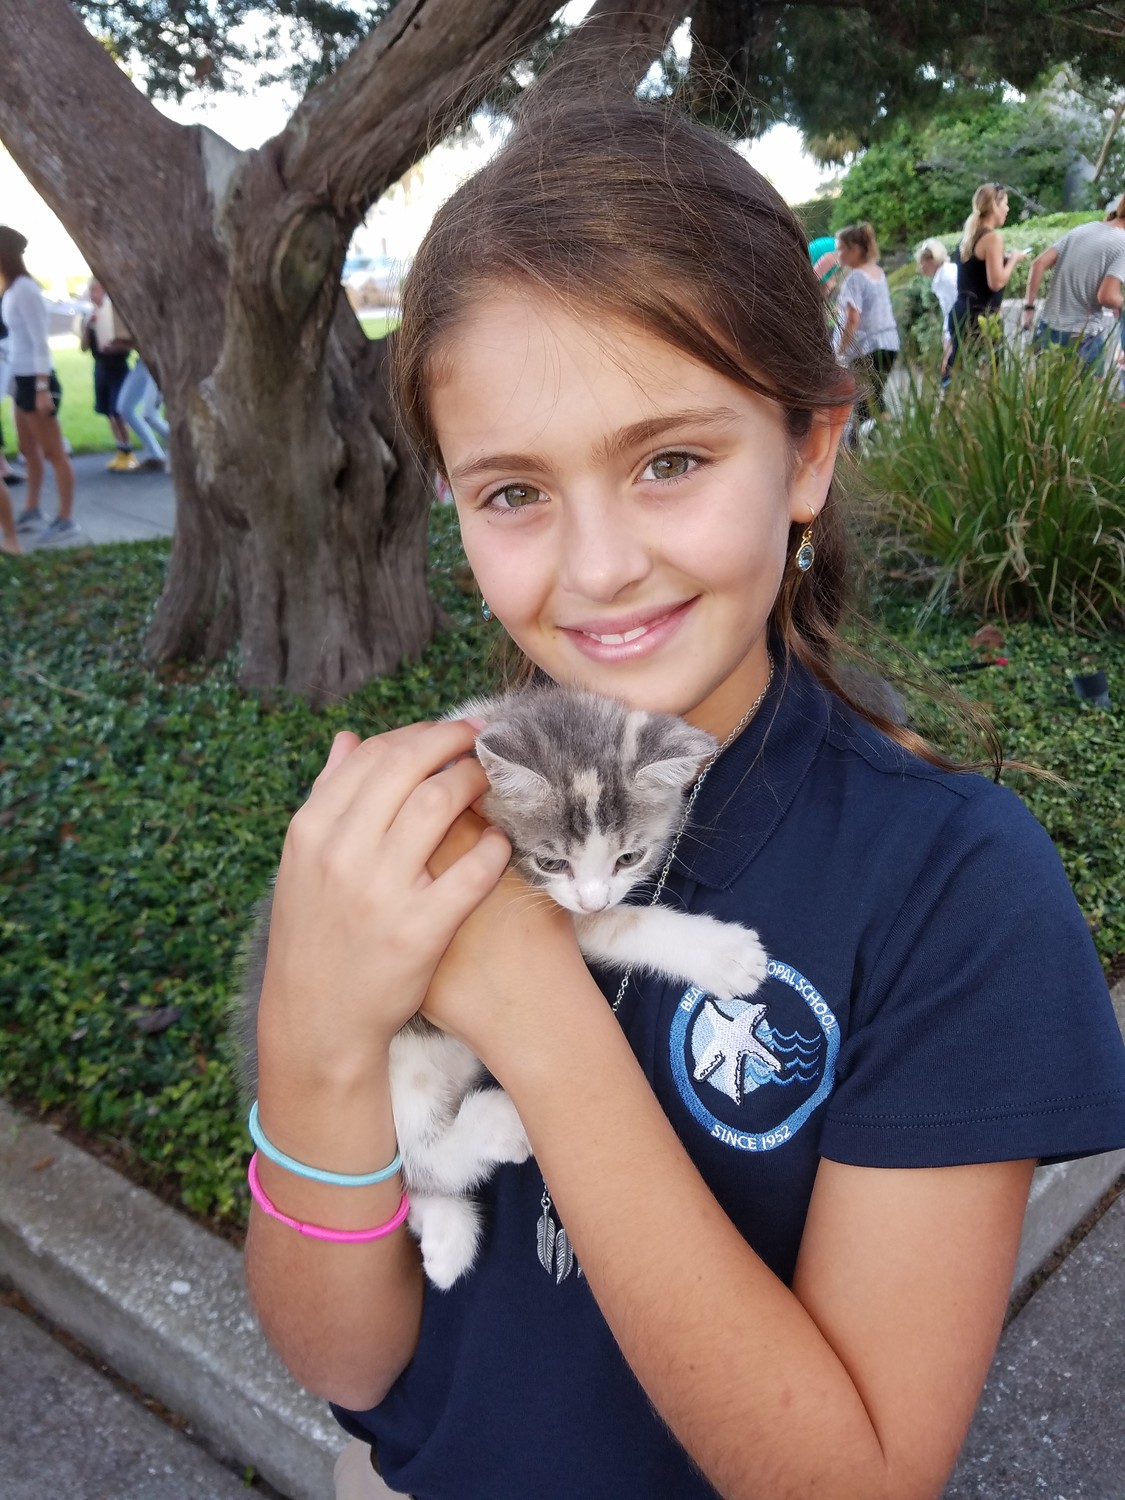 A Beaches Episcopal student holds a cat closely at “Blessing of the Pets.”